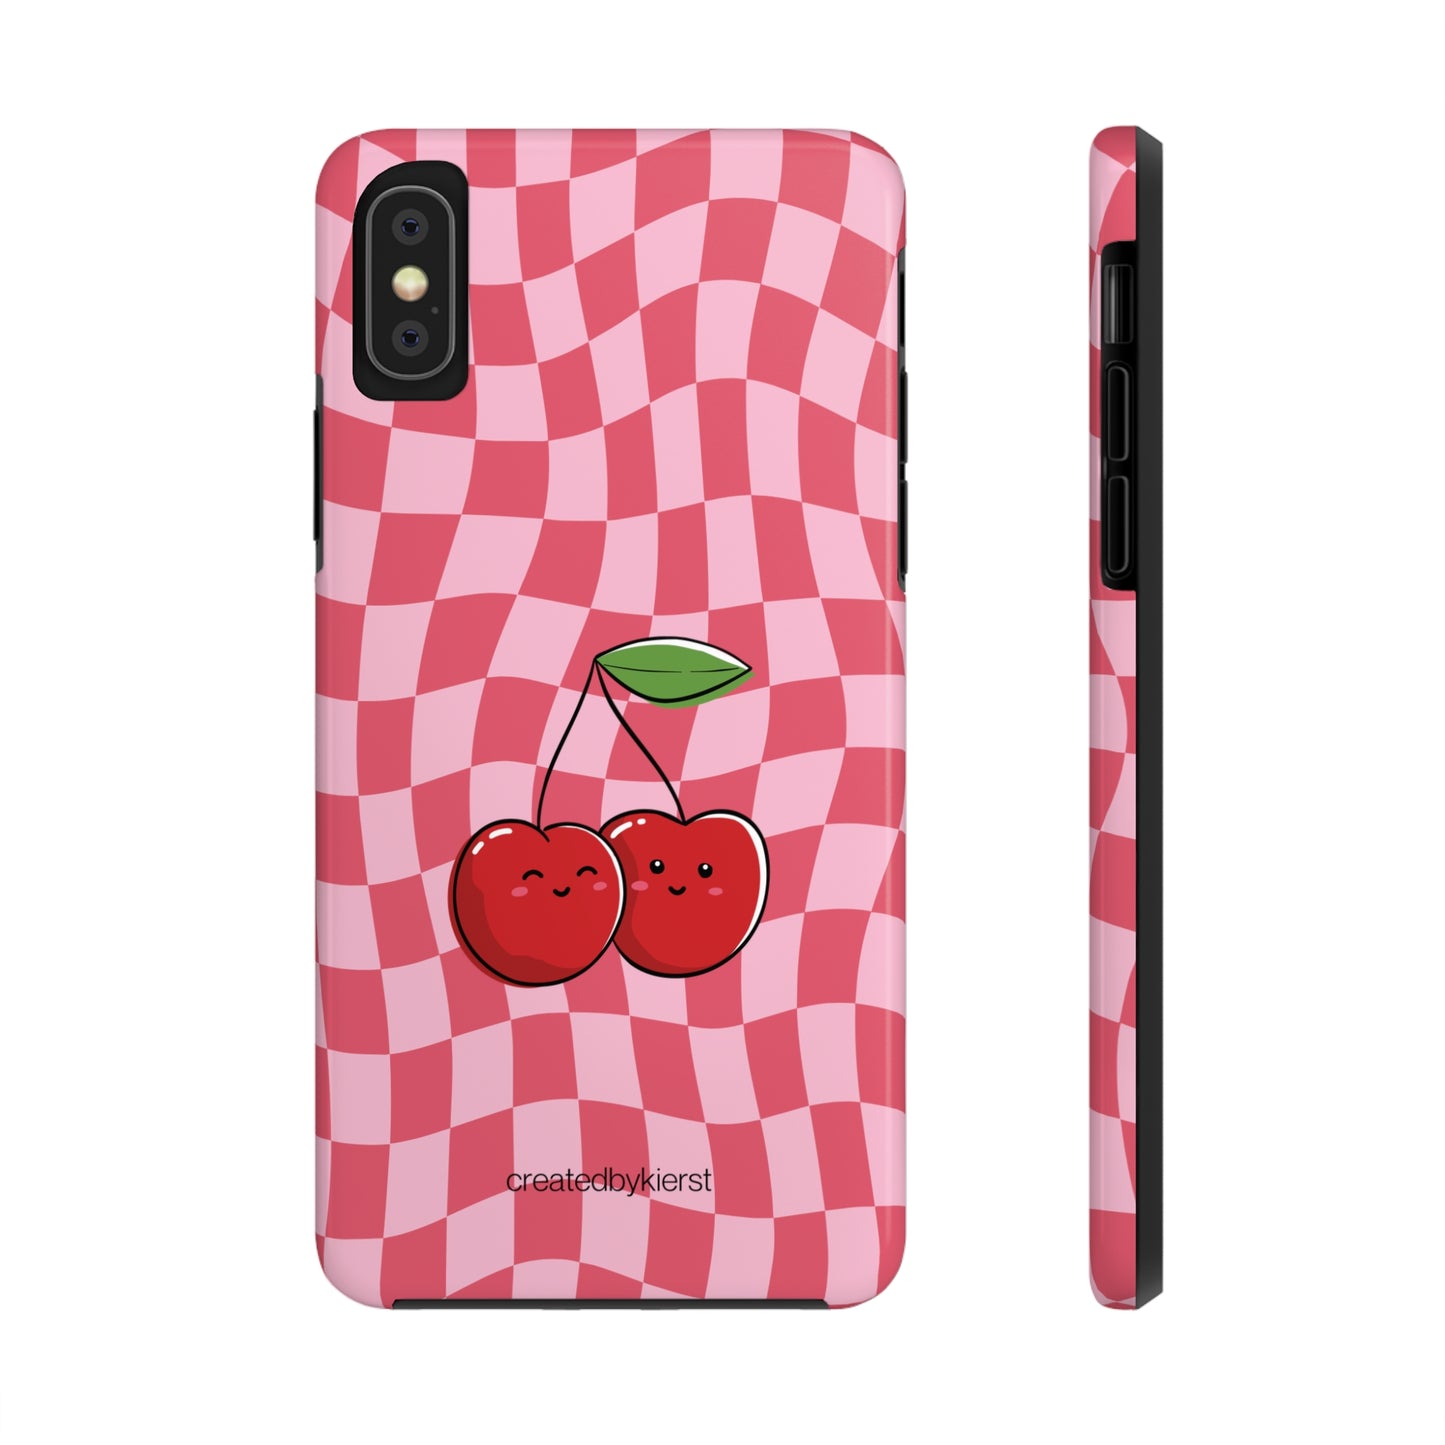 Animated Cherries and Pink Wavy Checkers iPhone Case